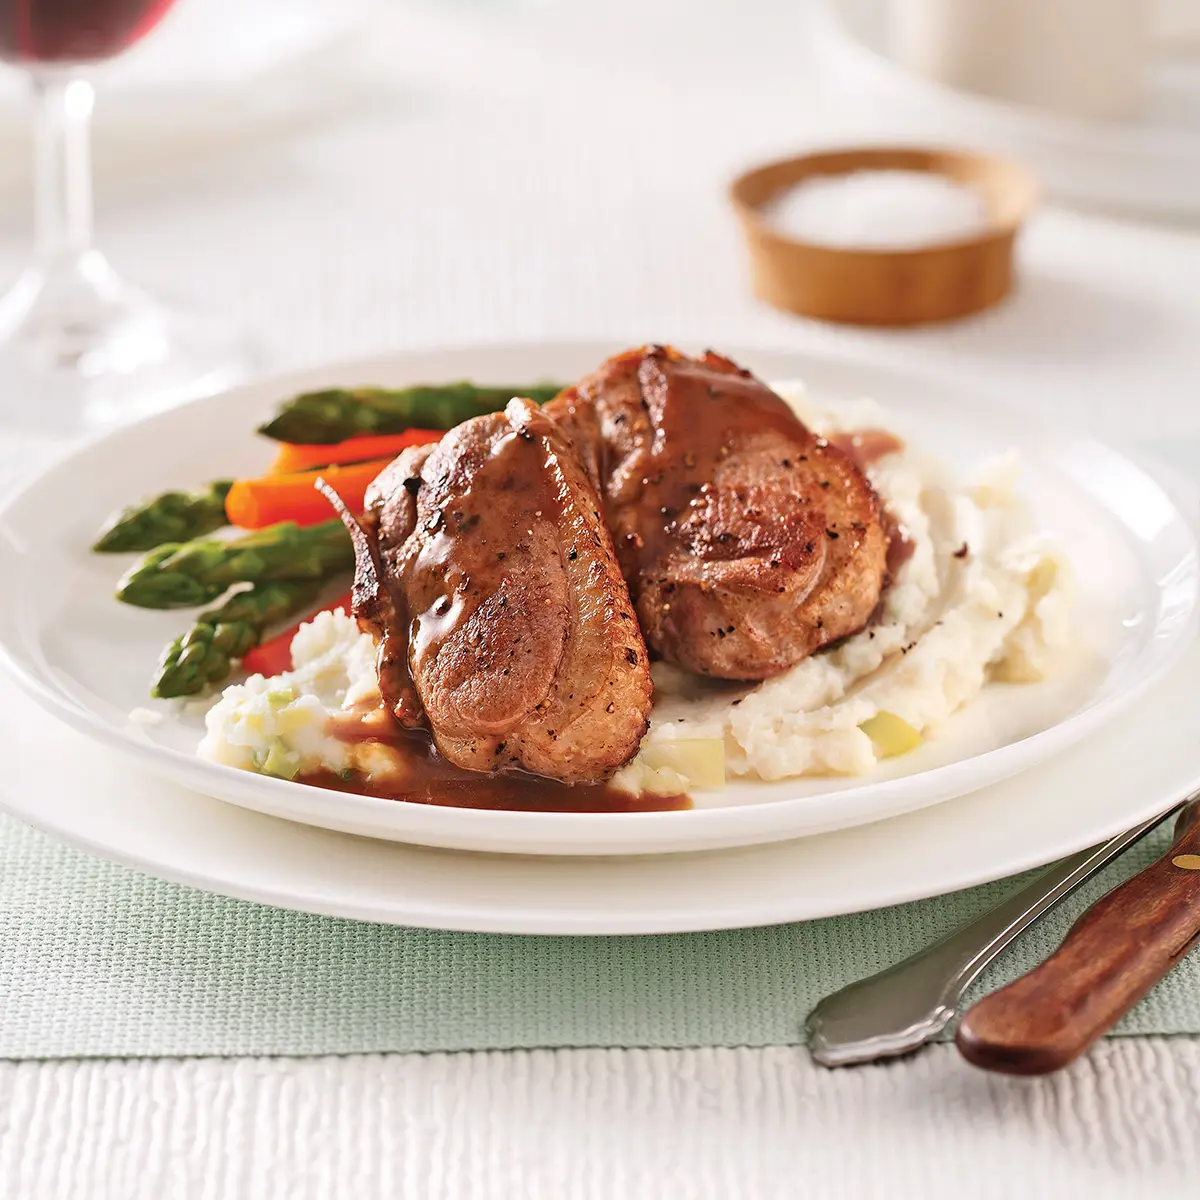 Caramelized duck chops